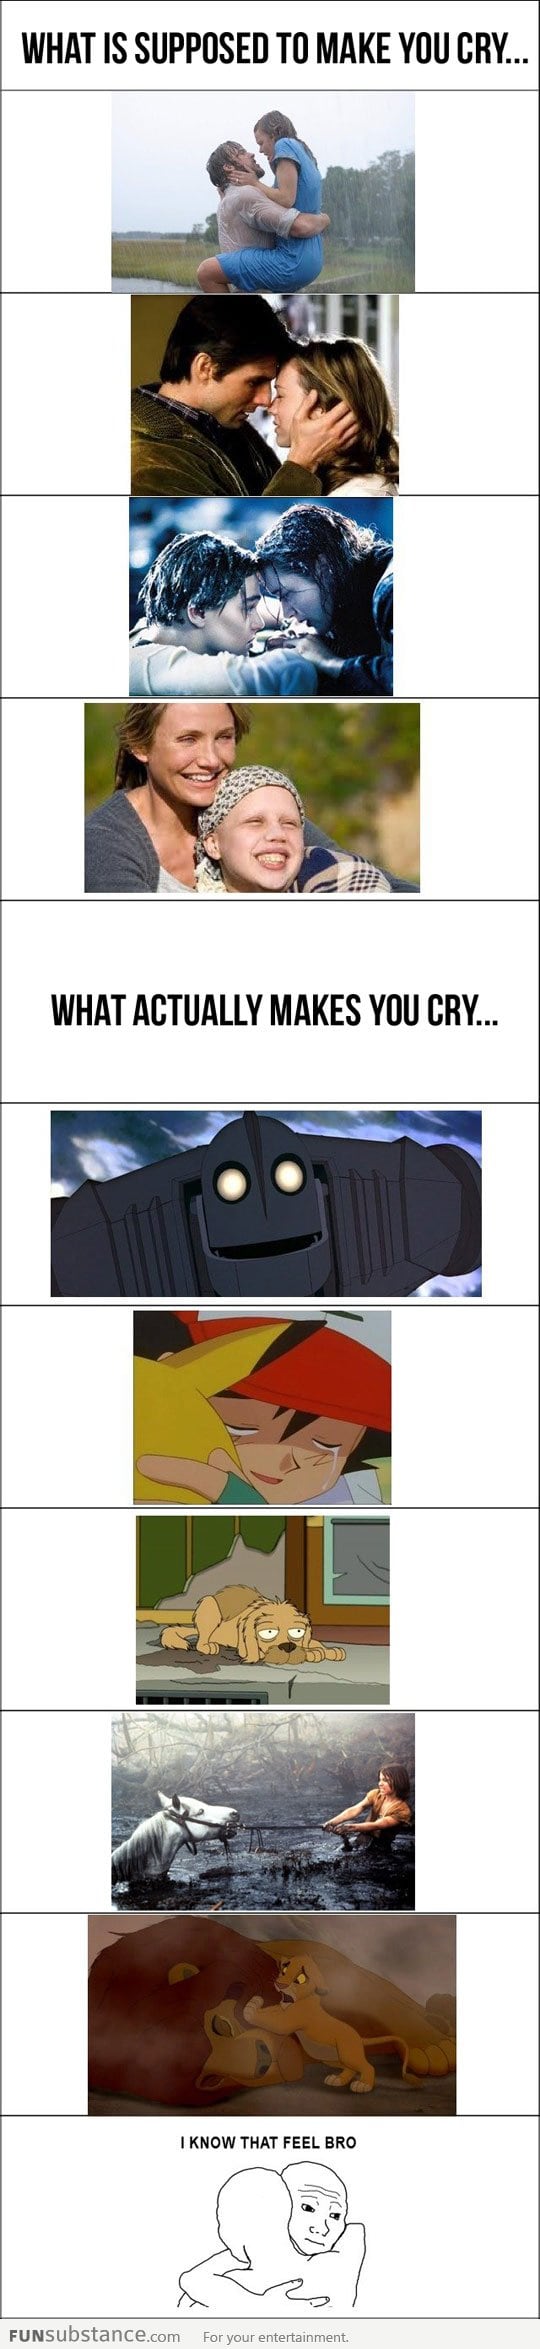 What actually makes you cry